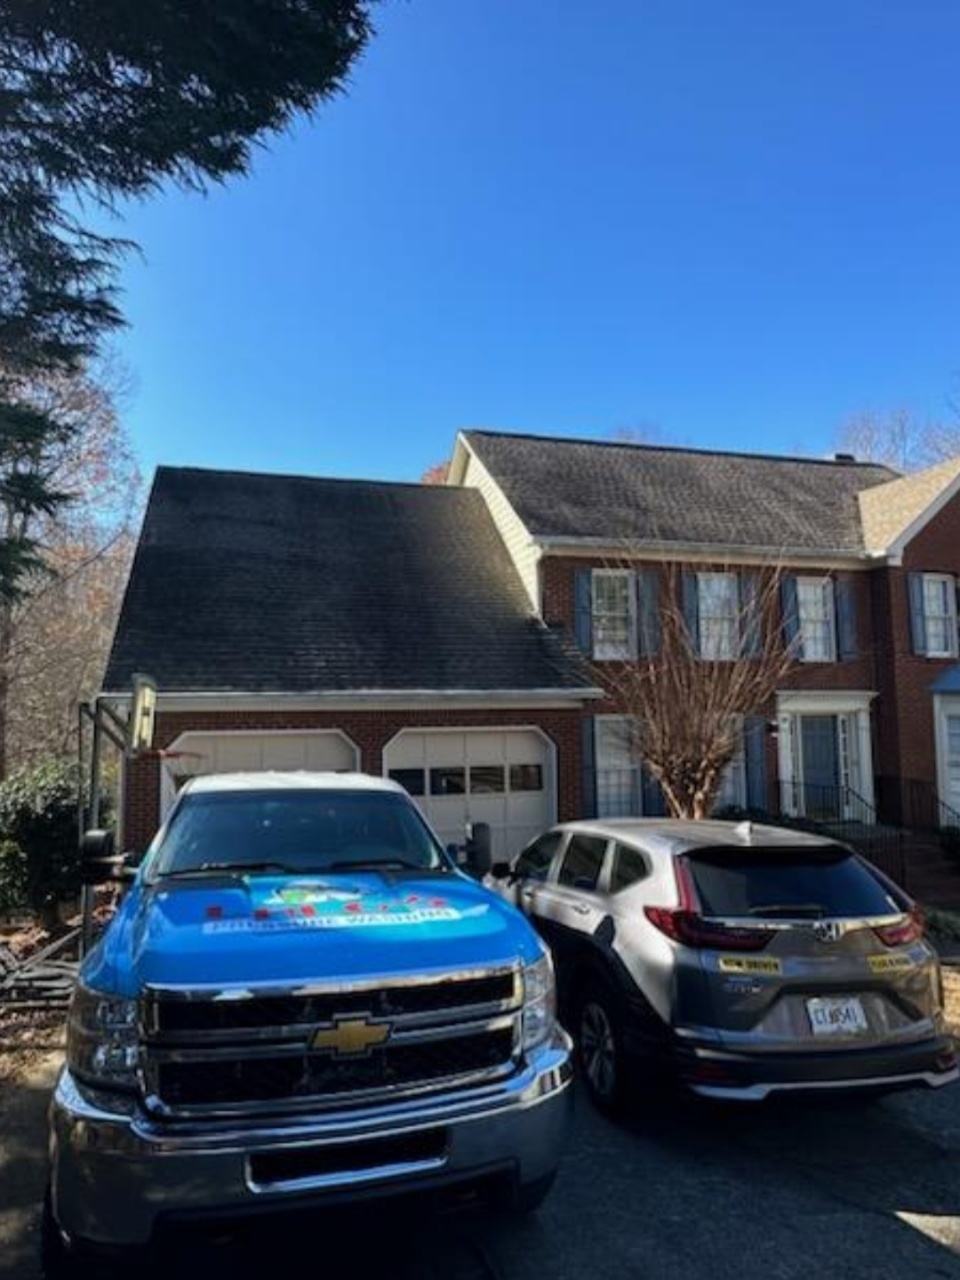 Professional Roof Washing Services in Kennesaw, Georgia